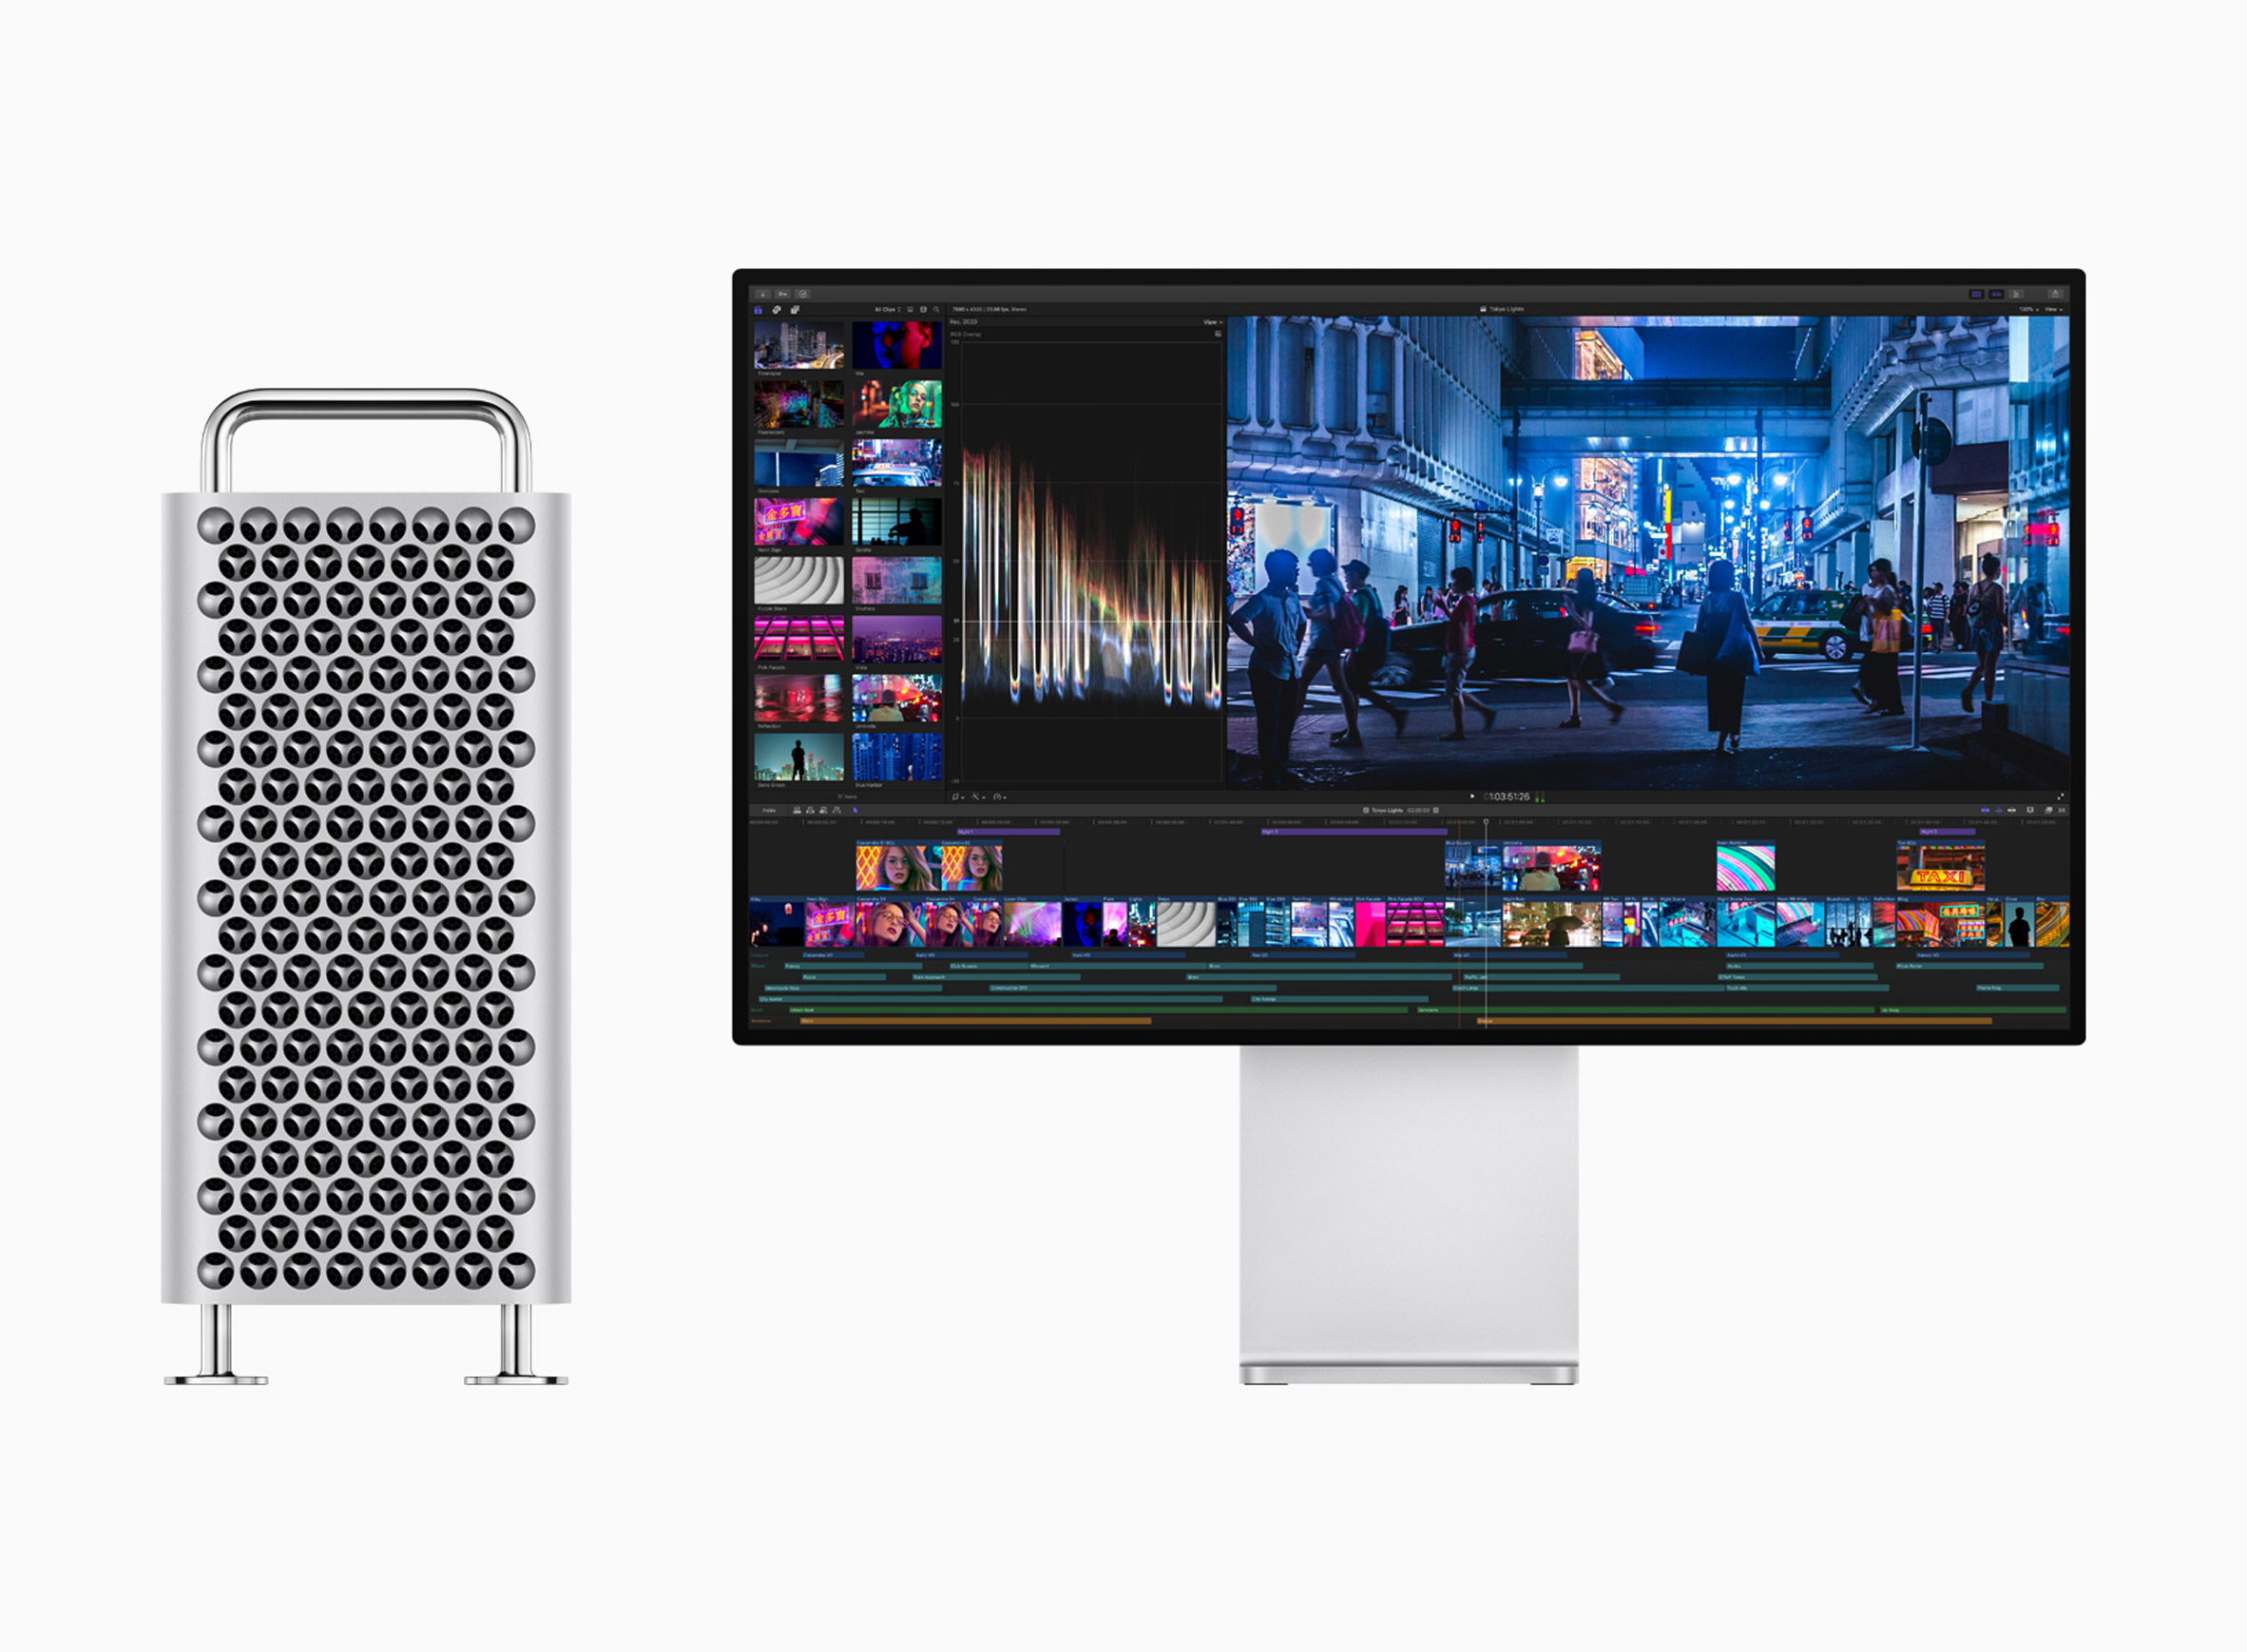 Apple's new Mac Pro is its most powerful desktop computer to date